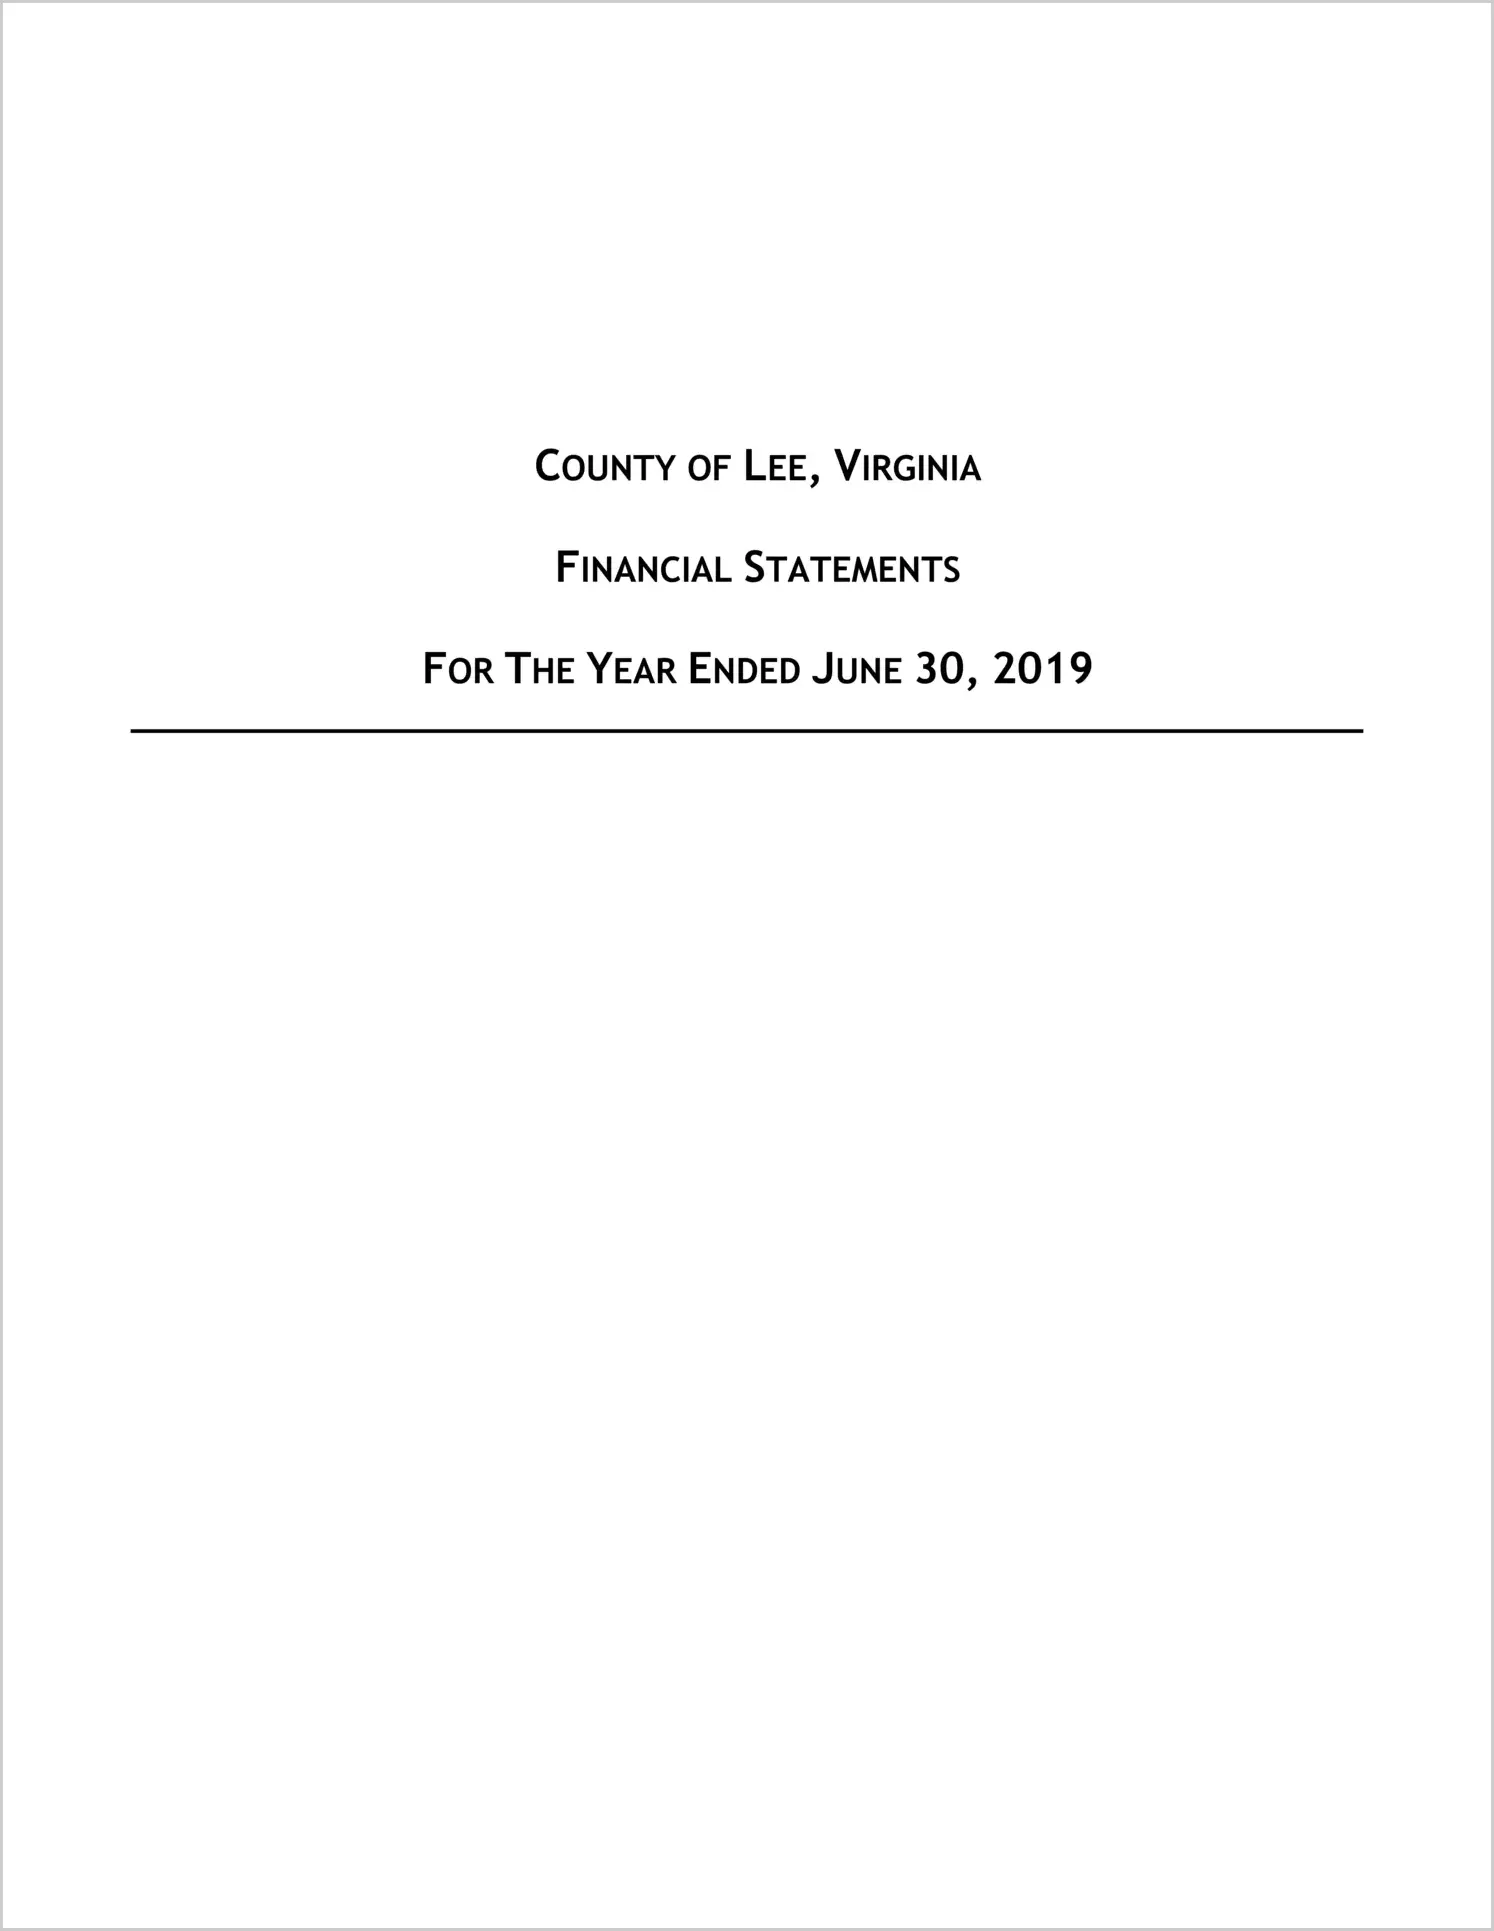 2019 Annual Financial Report for County of Lee